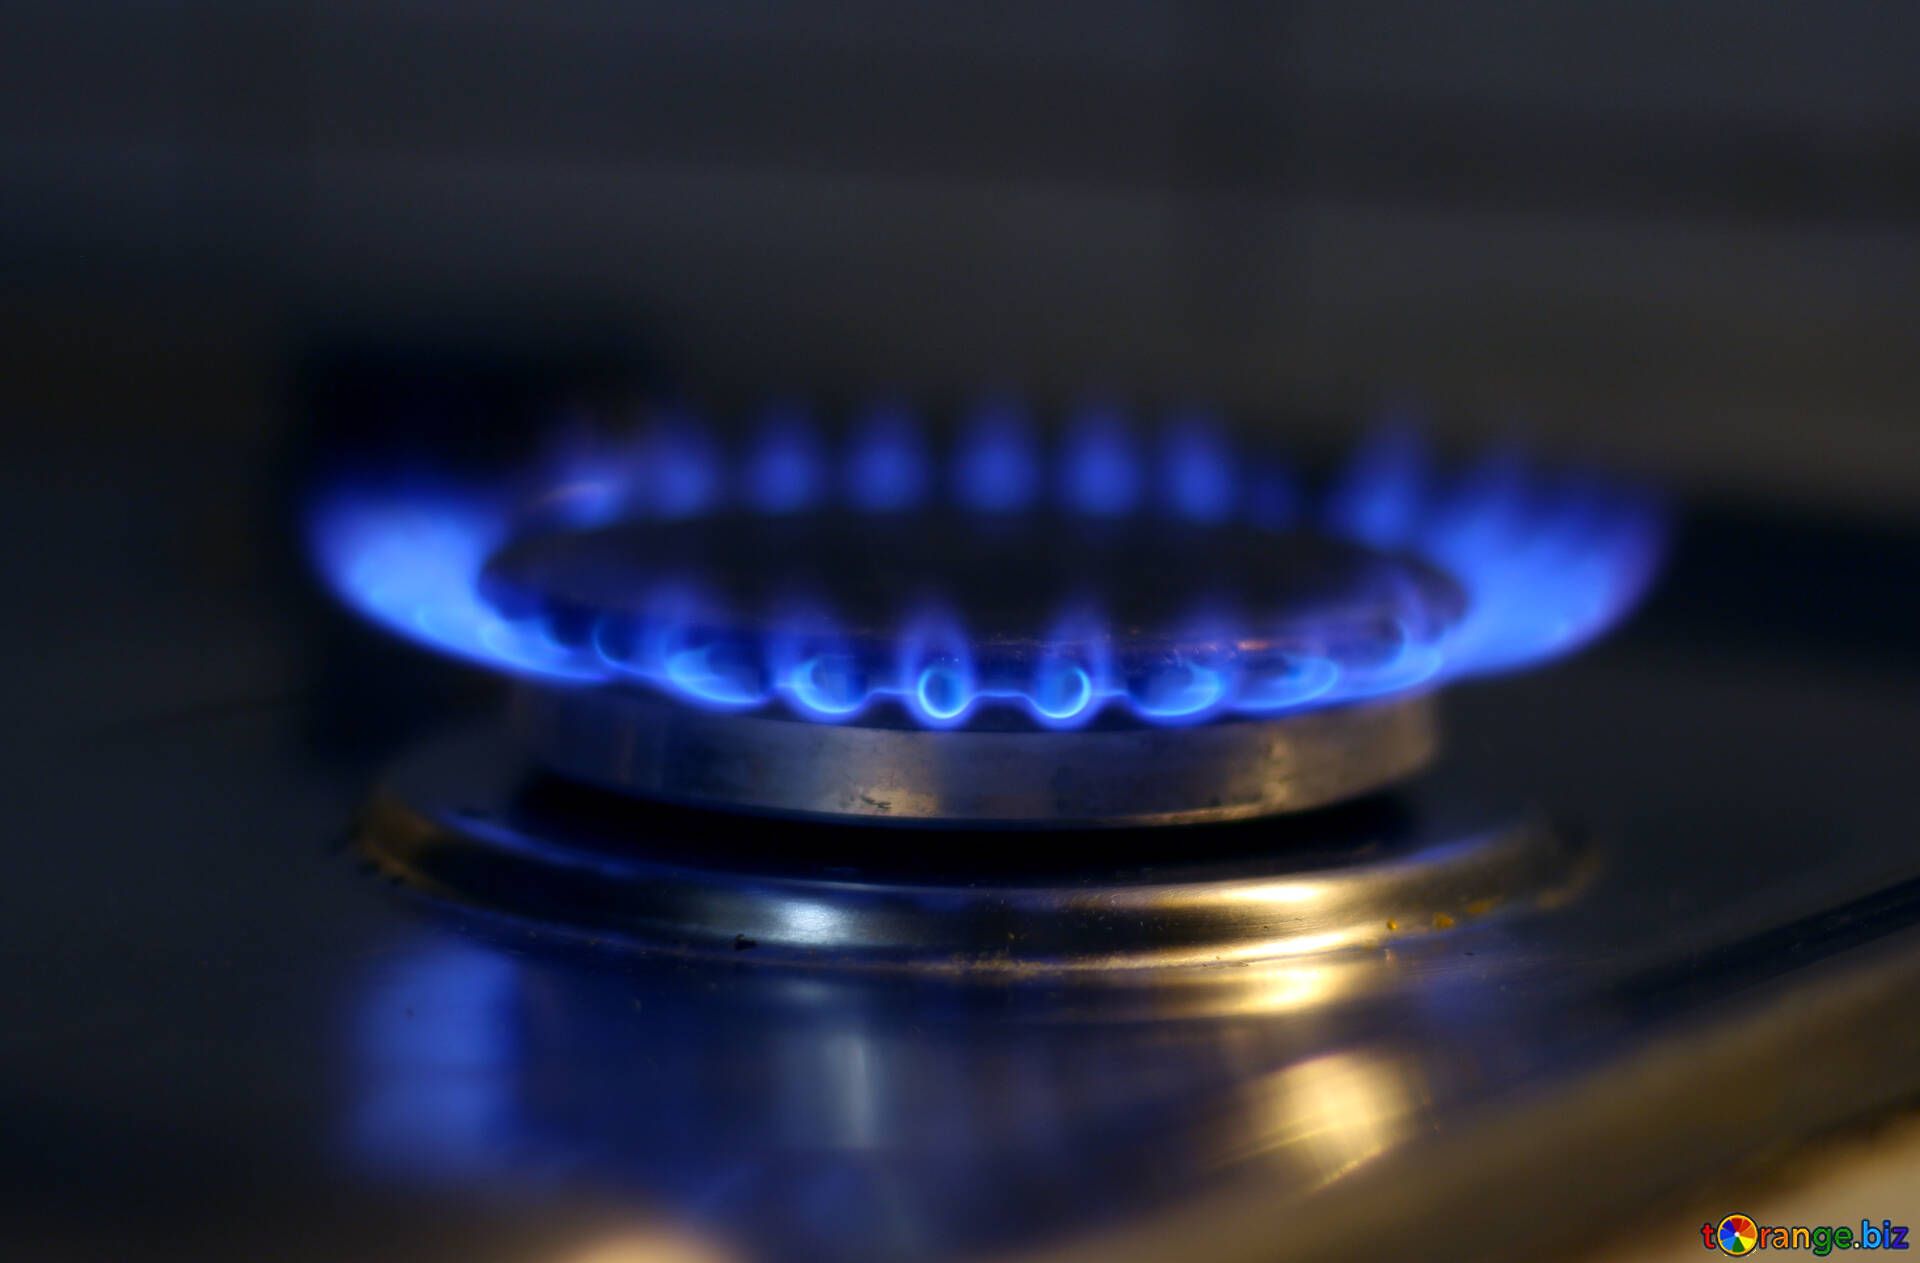 Natural Gas Image The Gas Is Burning On The Stove Image Service № 38482. Torange.biz Free Pics On Cc By License